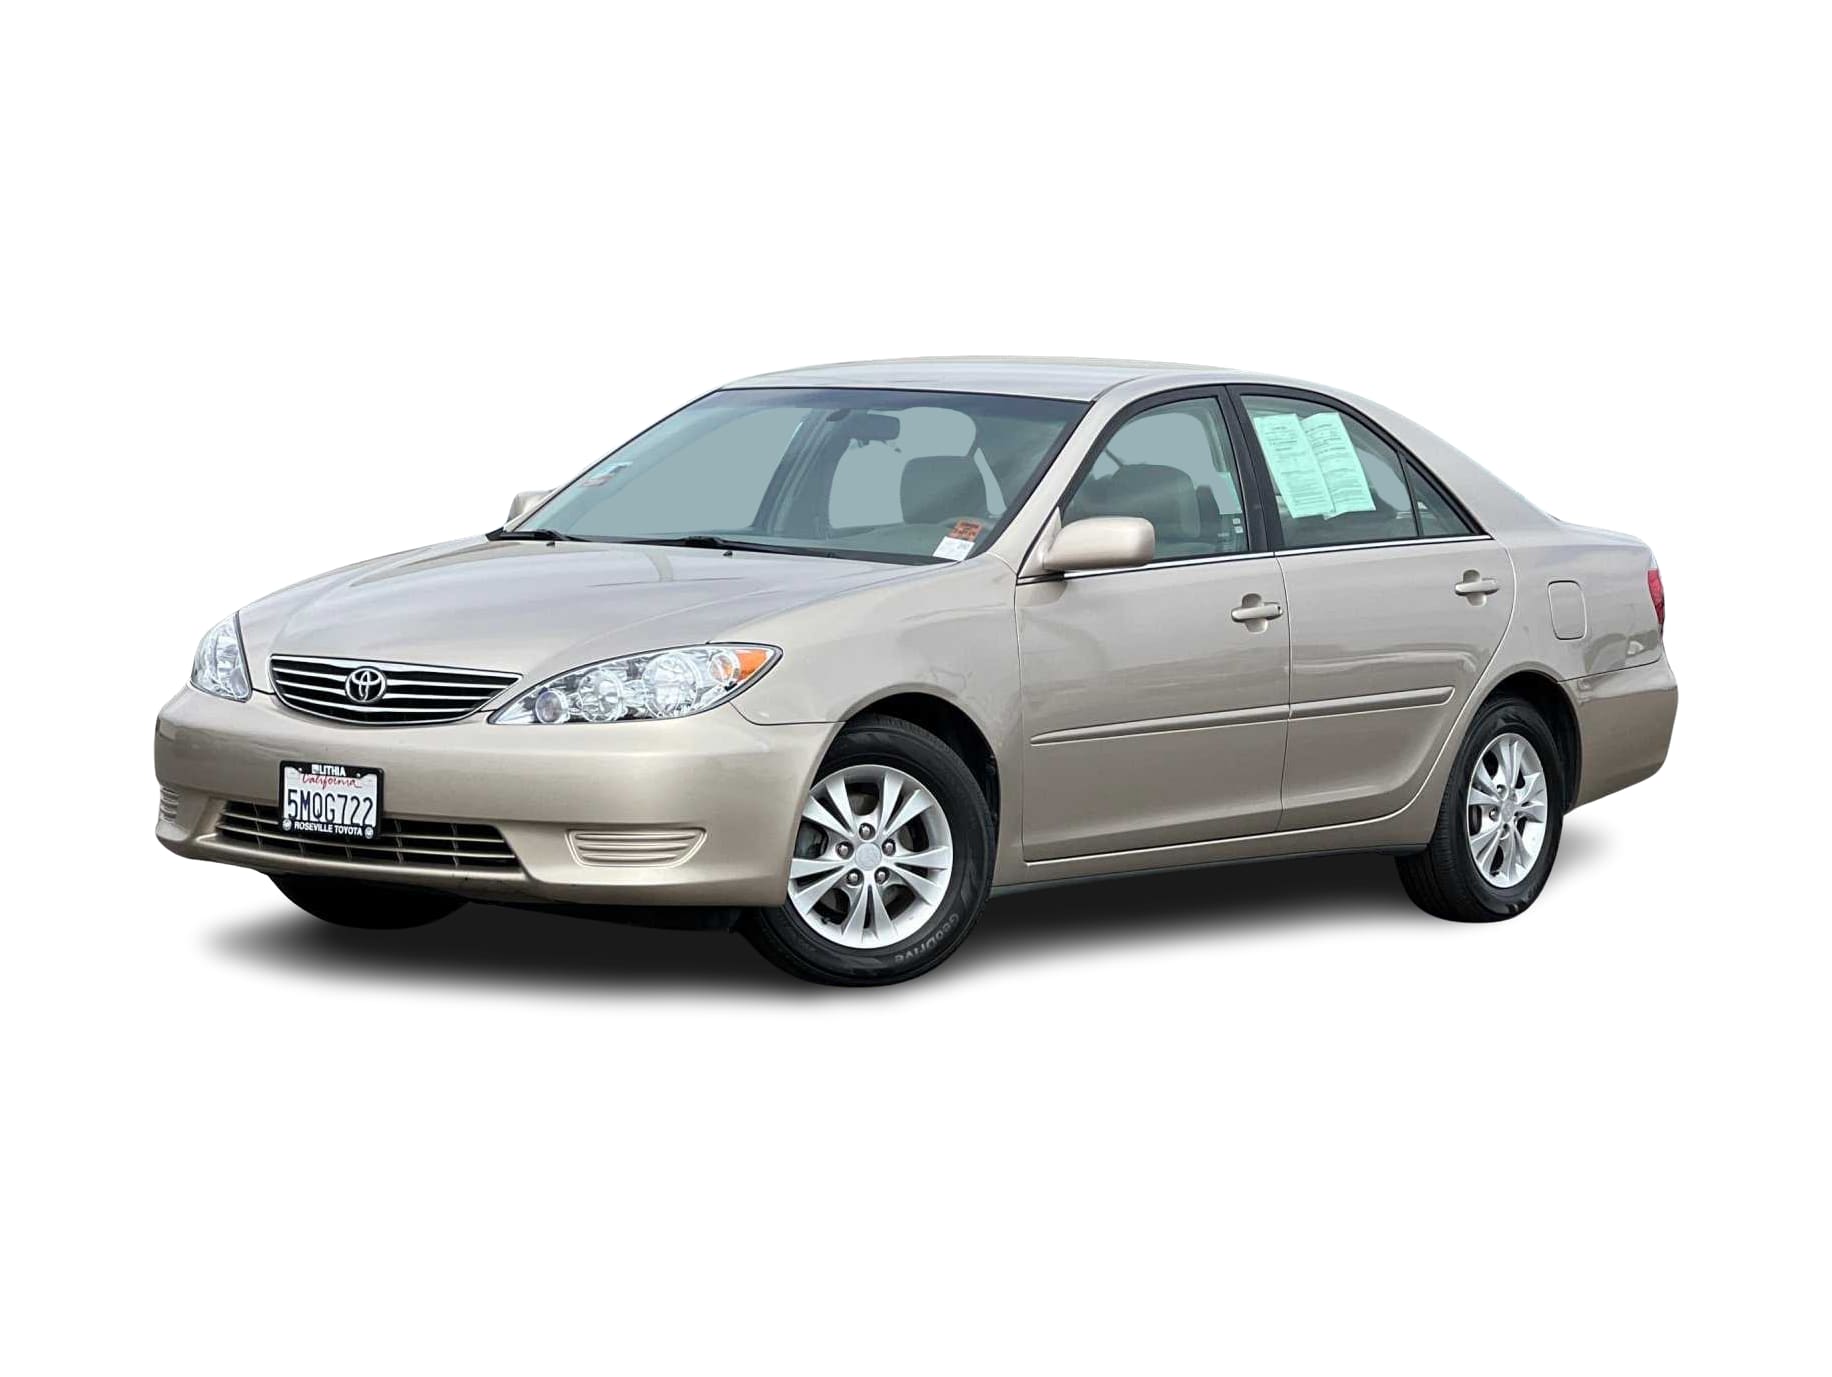 2005 Toyota Camry LE -
                Roseville, CA